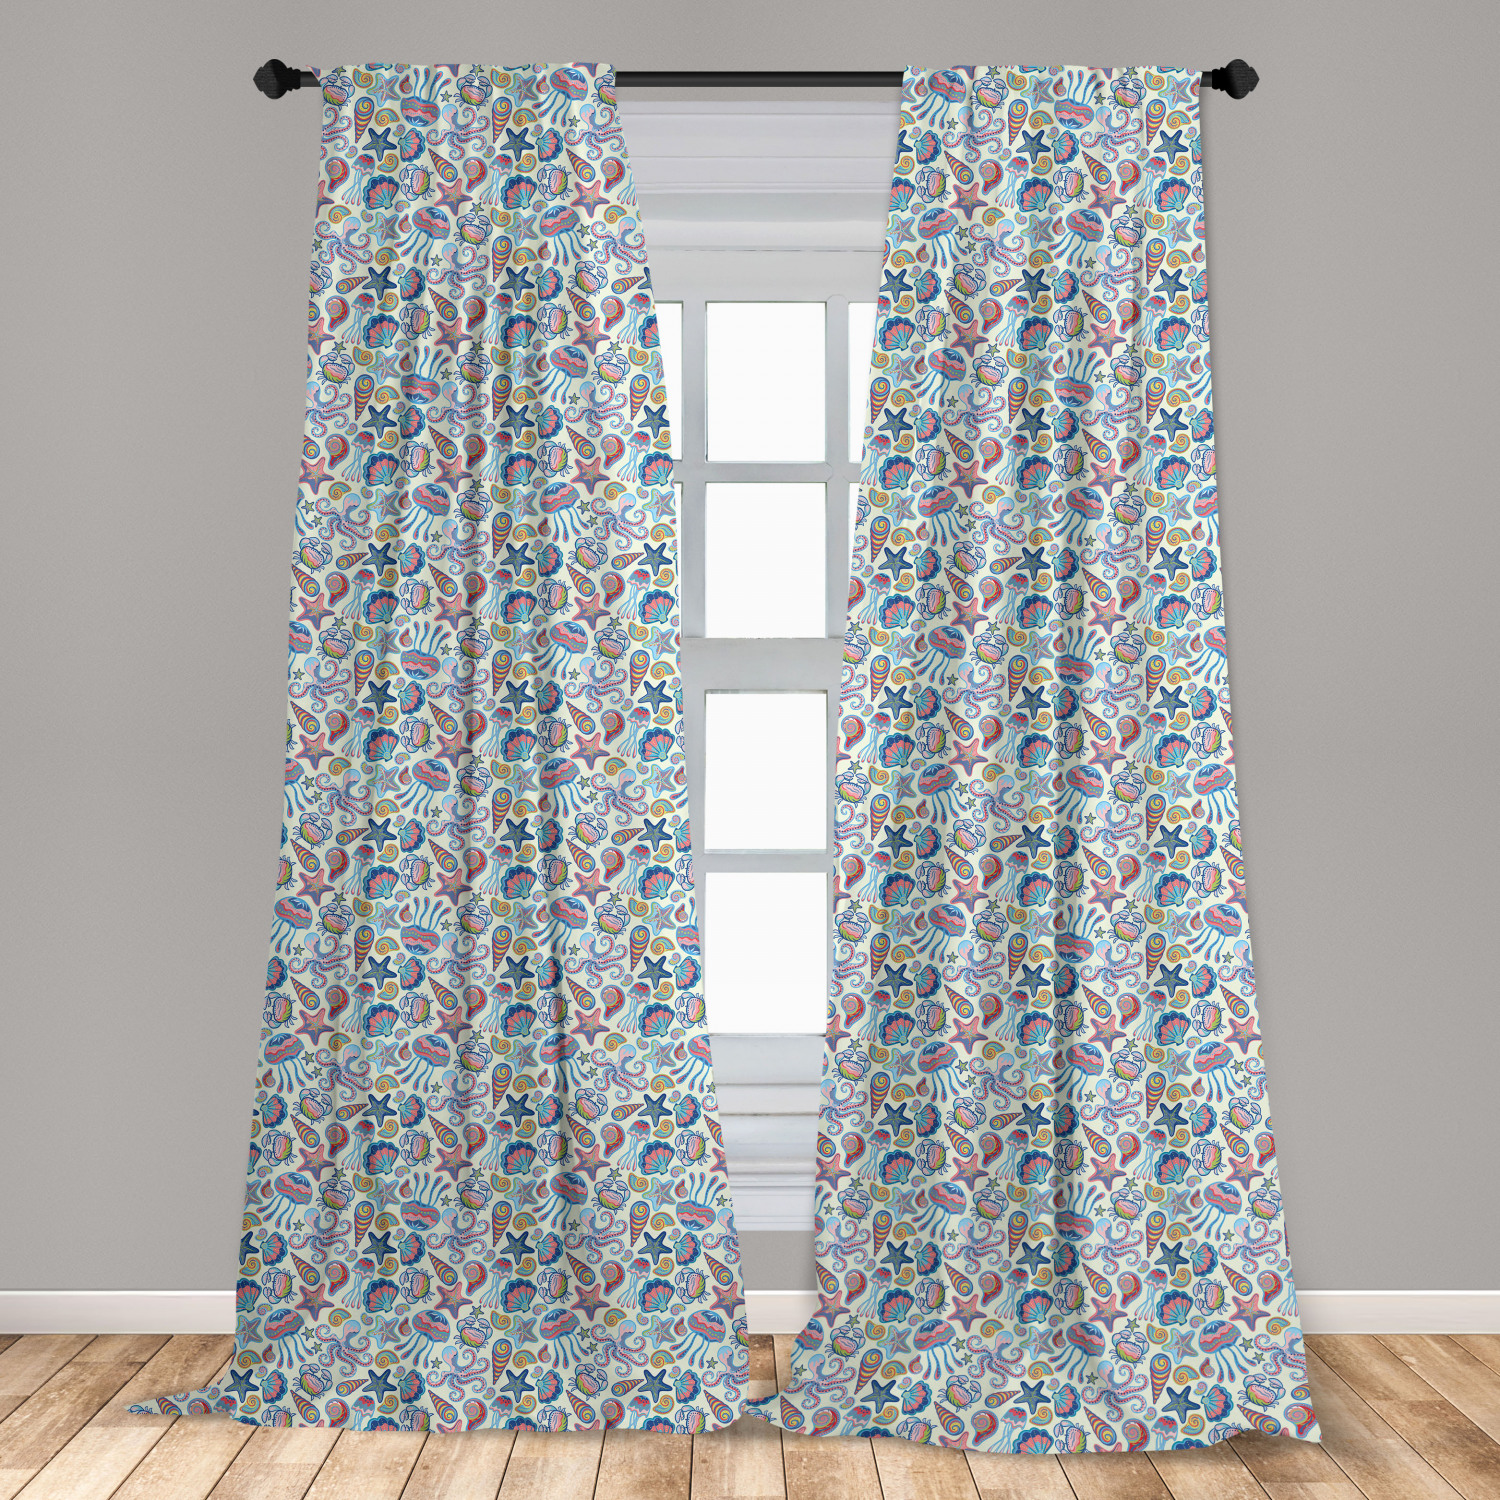 Octopus Microfiber Curtains 2 Panel Set Living Room Bedroom in 3 Sizes